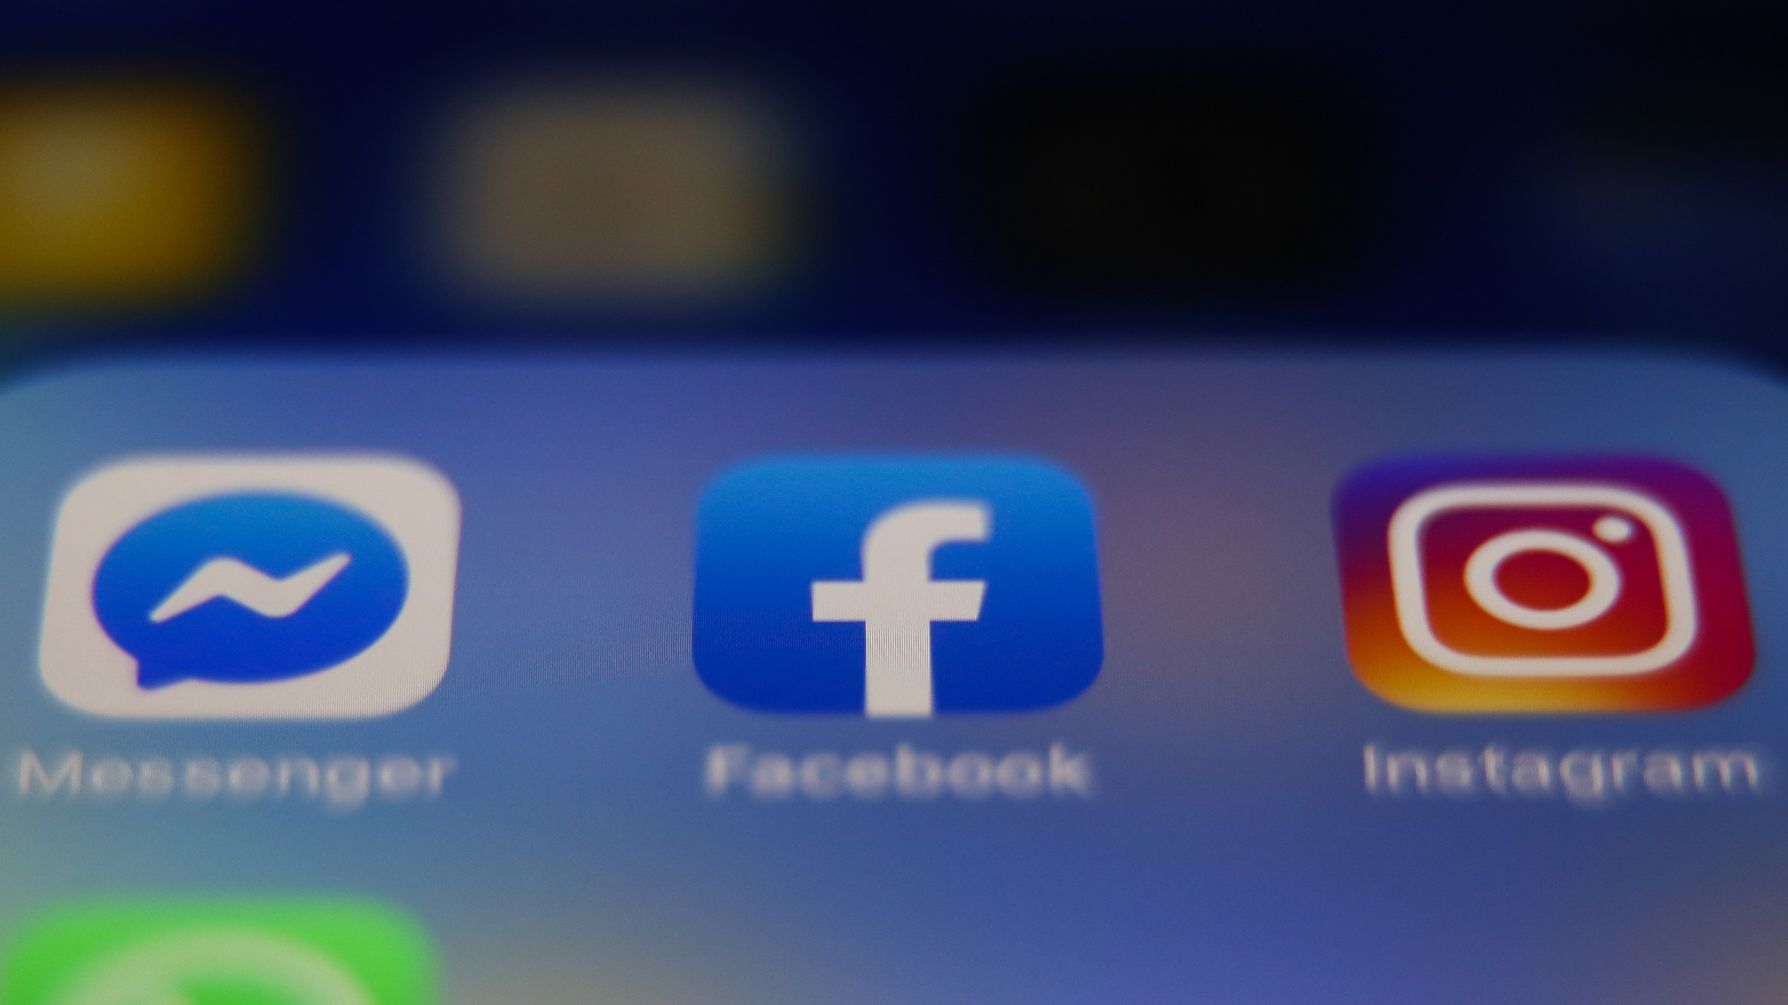 Thousands of users reported issues accessing Facebook, Instagram and Facebook Messenger on Tuesday morning.